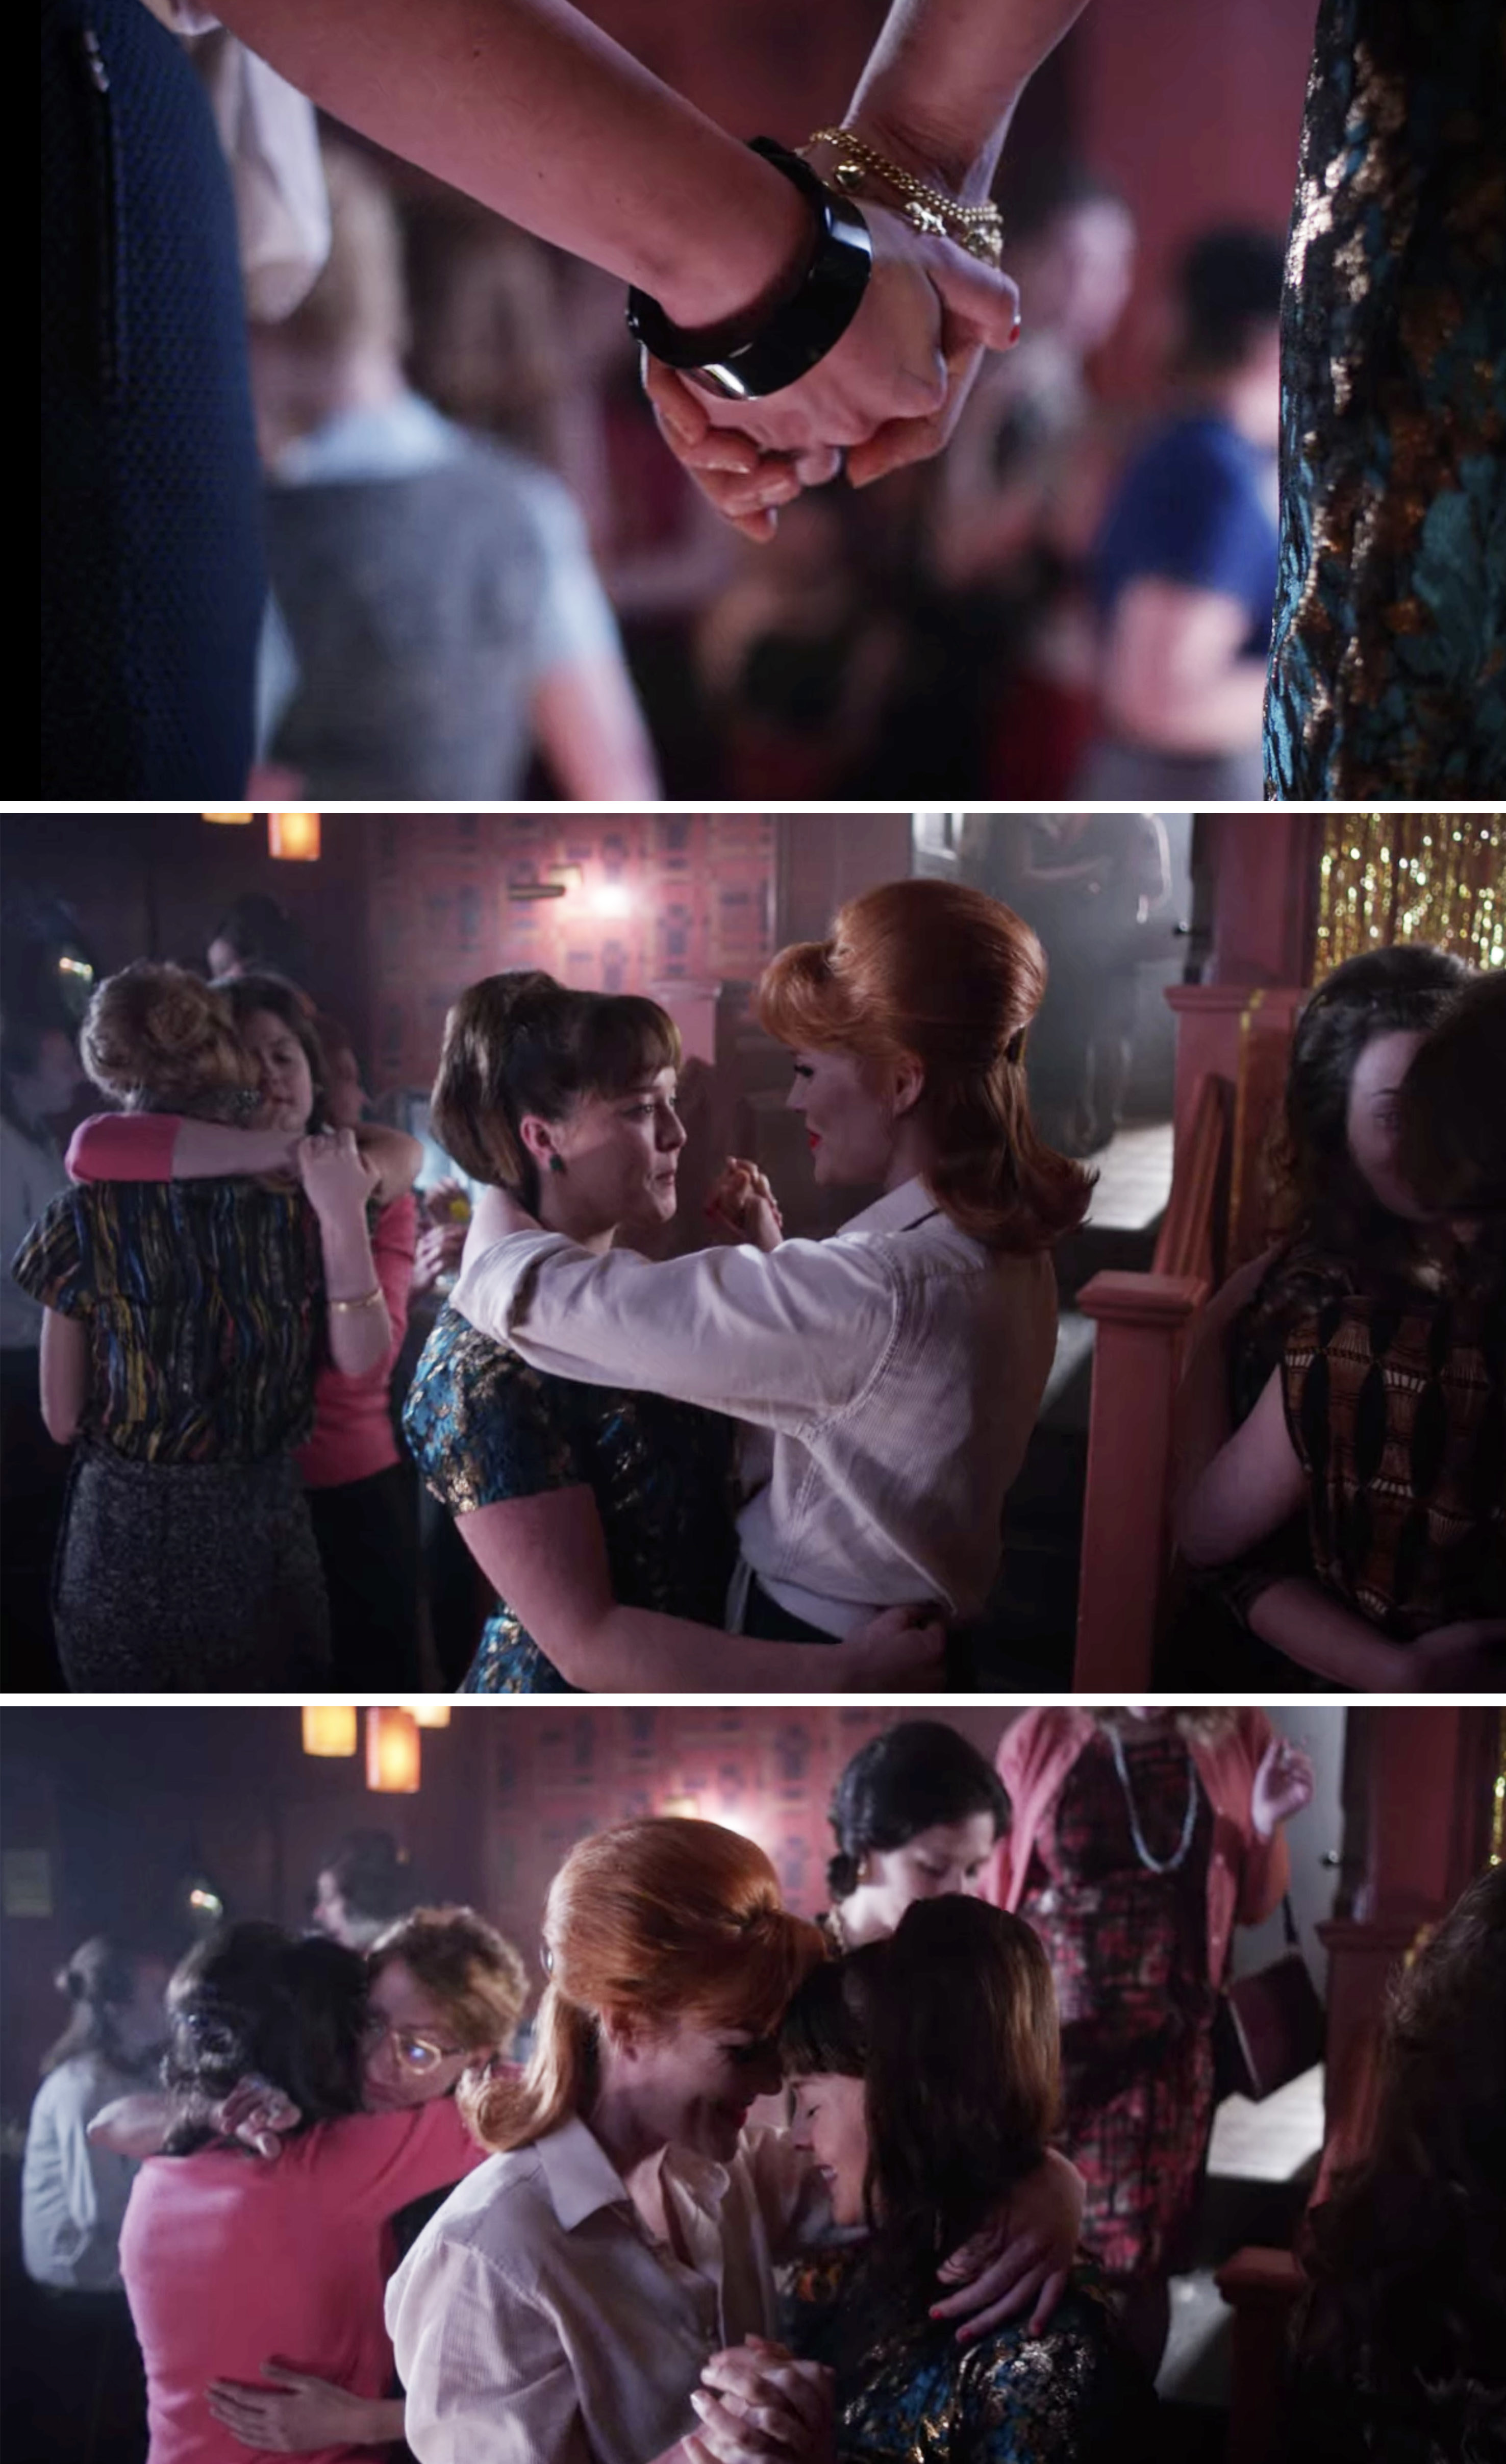 Patsy and Delia dancing and holding hands